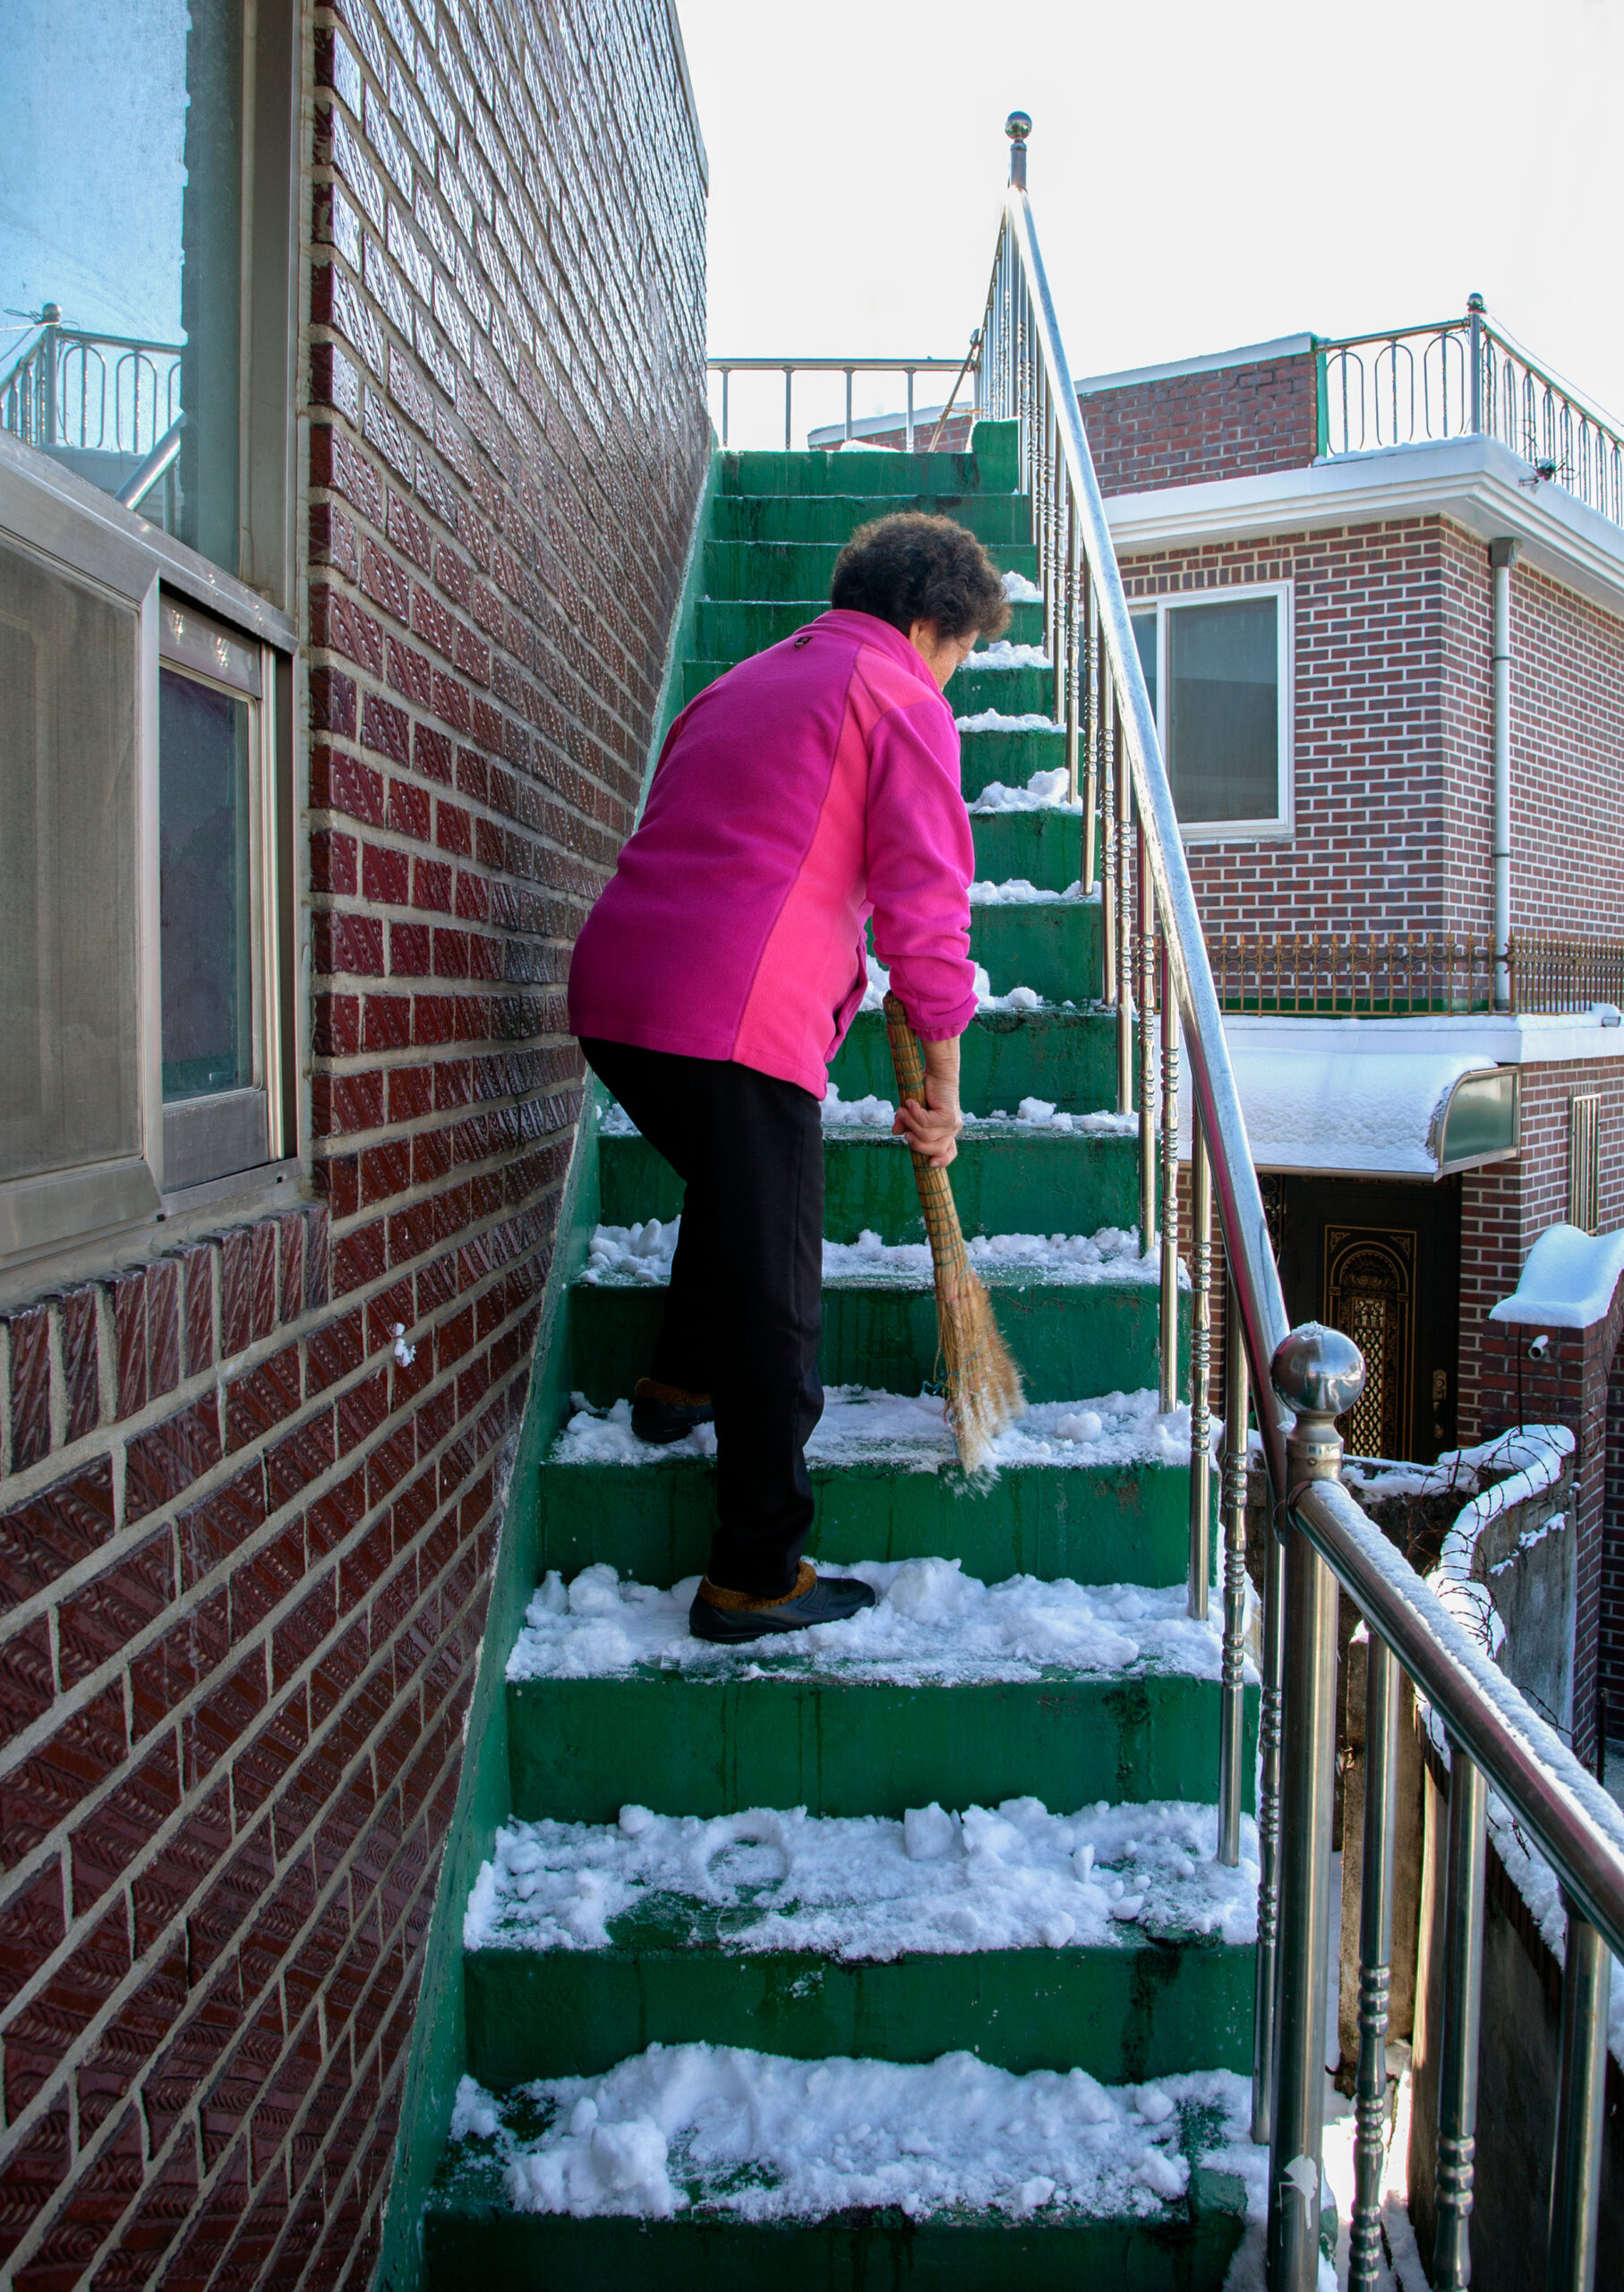 A woman sweeps snow off stairs.